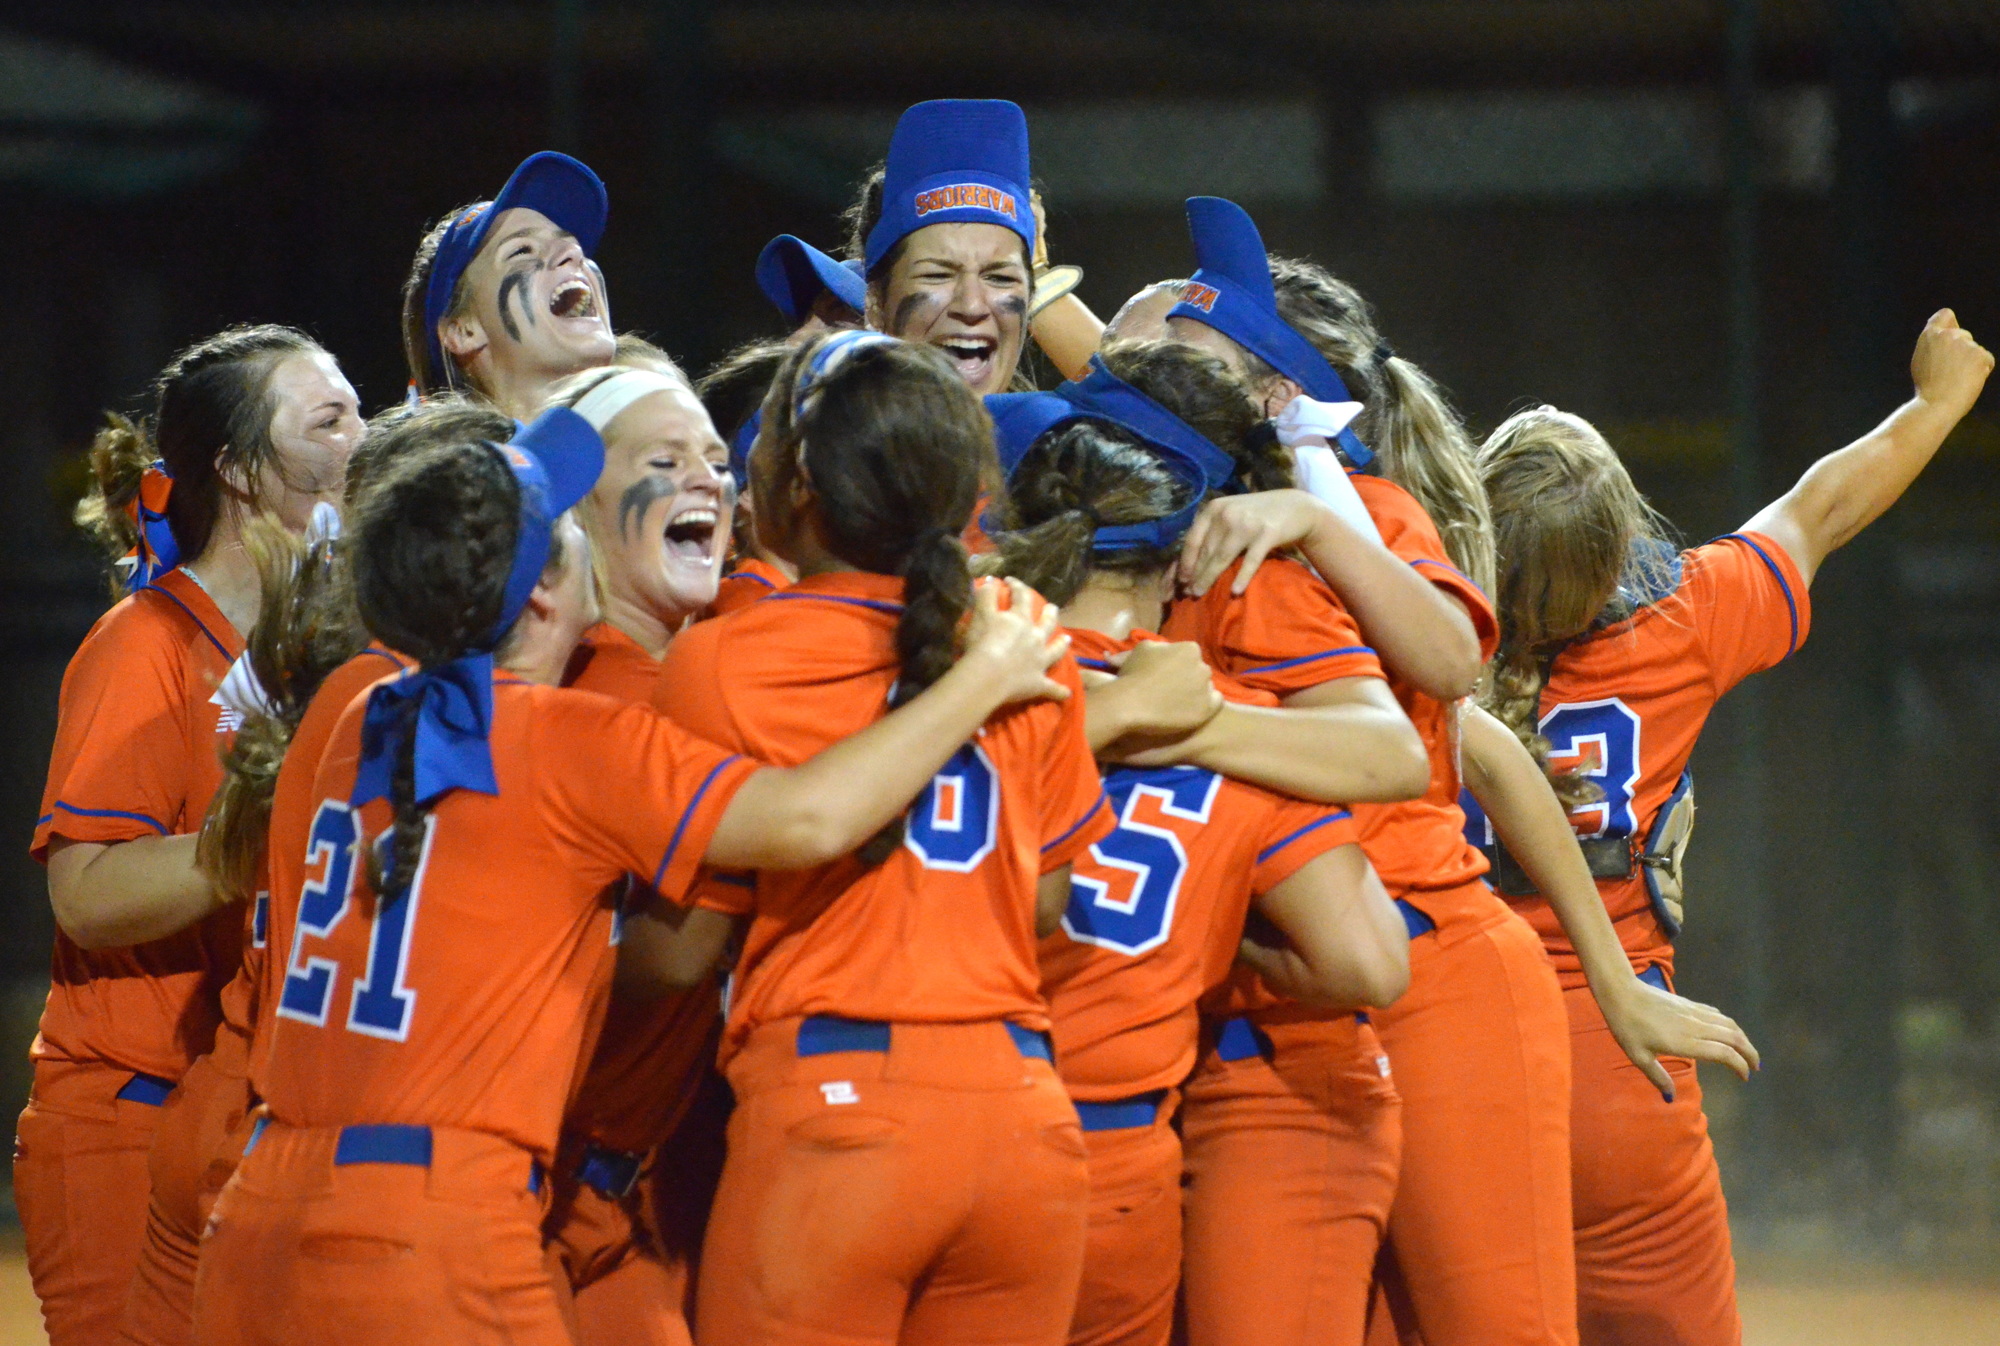 The West Orange softball program has won consecutive state championships in 2016 and 2017